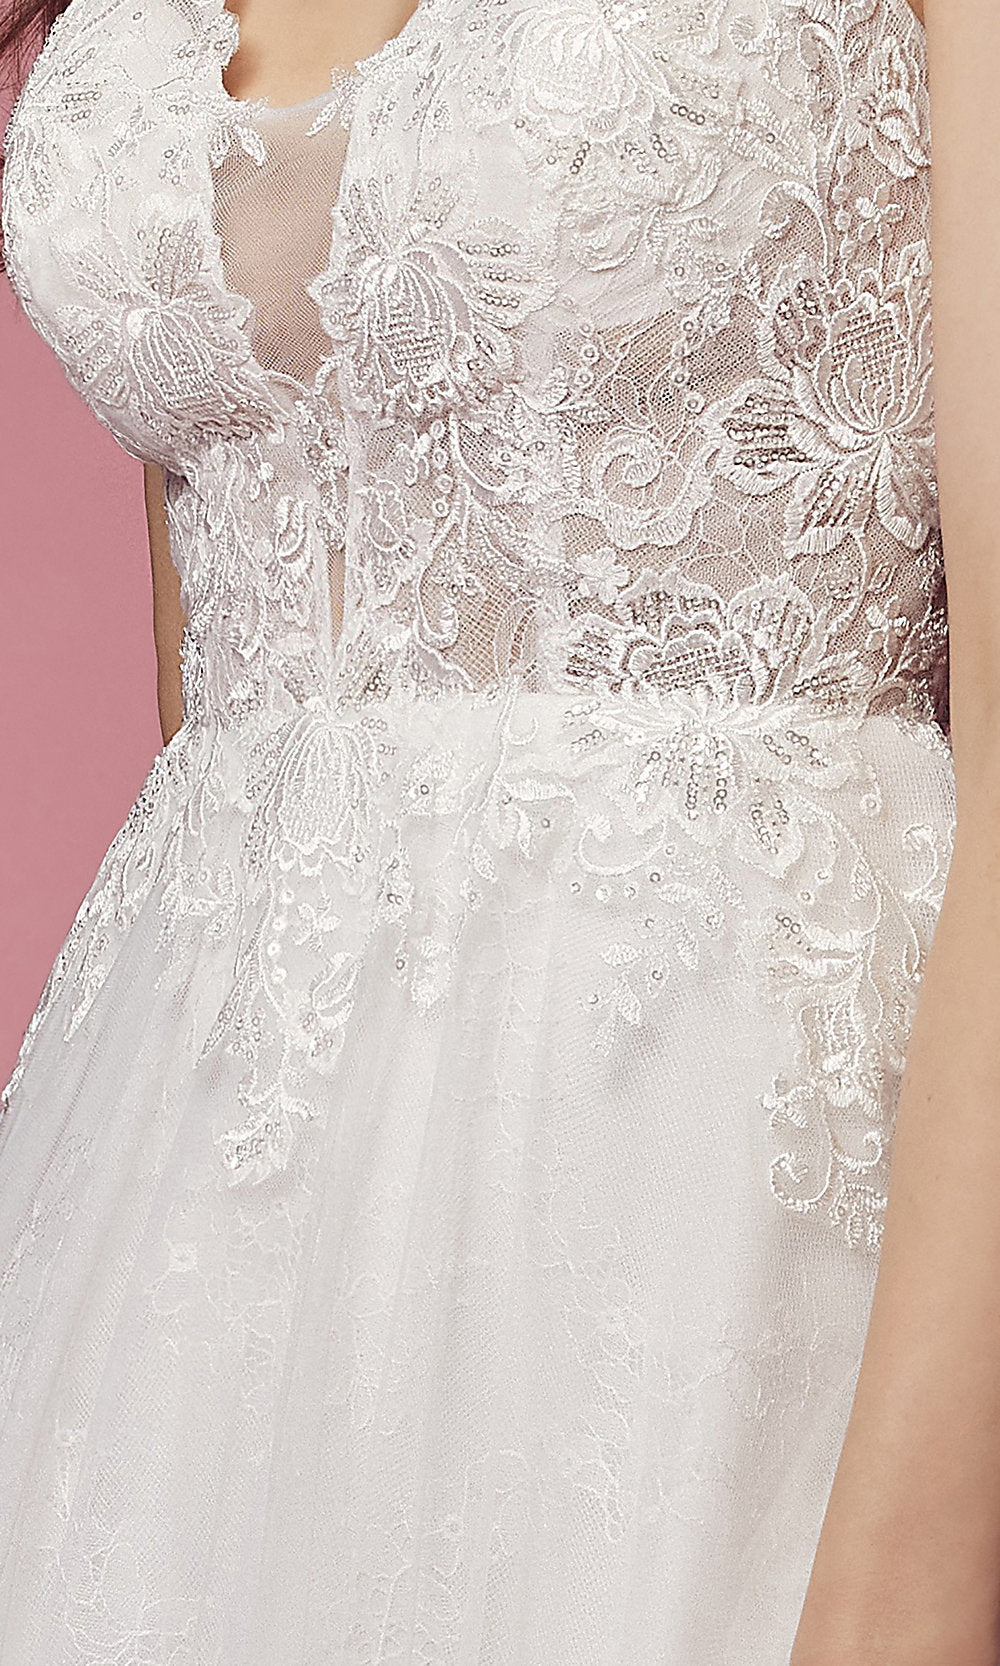 Narianna-White Lace-Embroidered Ball-Gown Wedding Dress